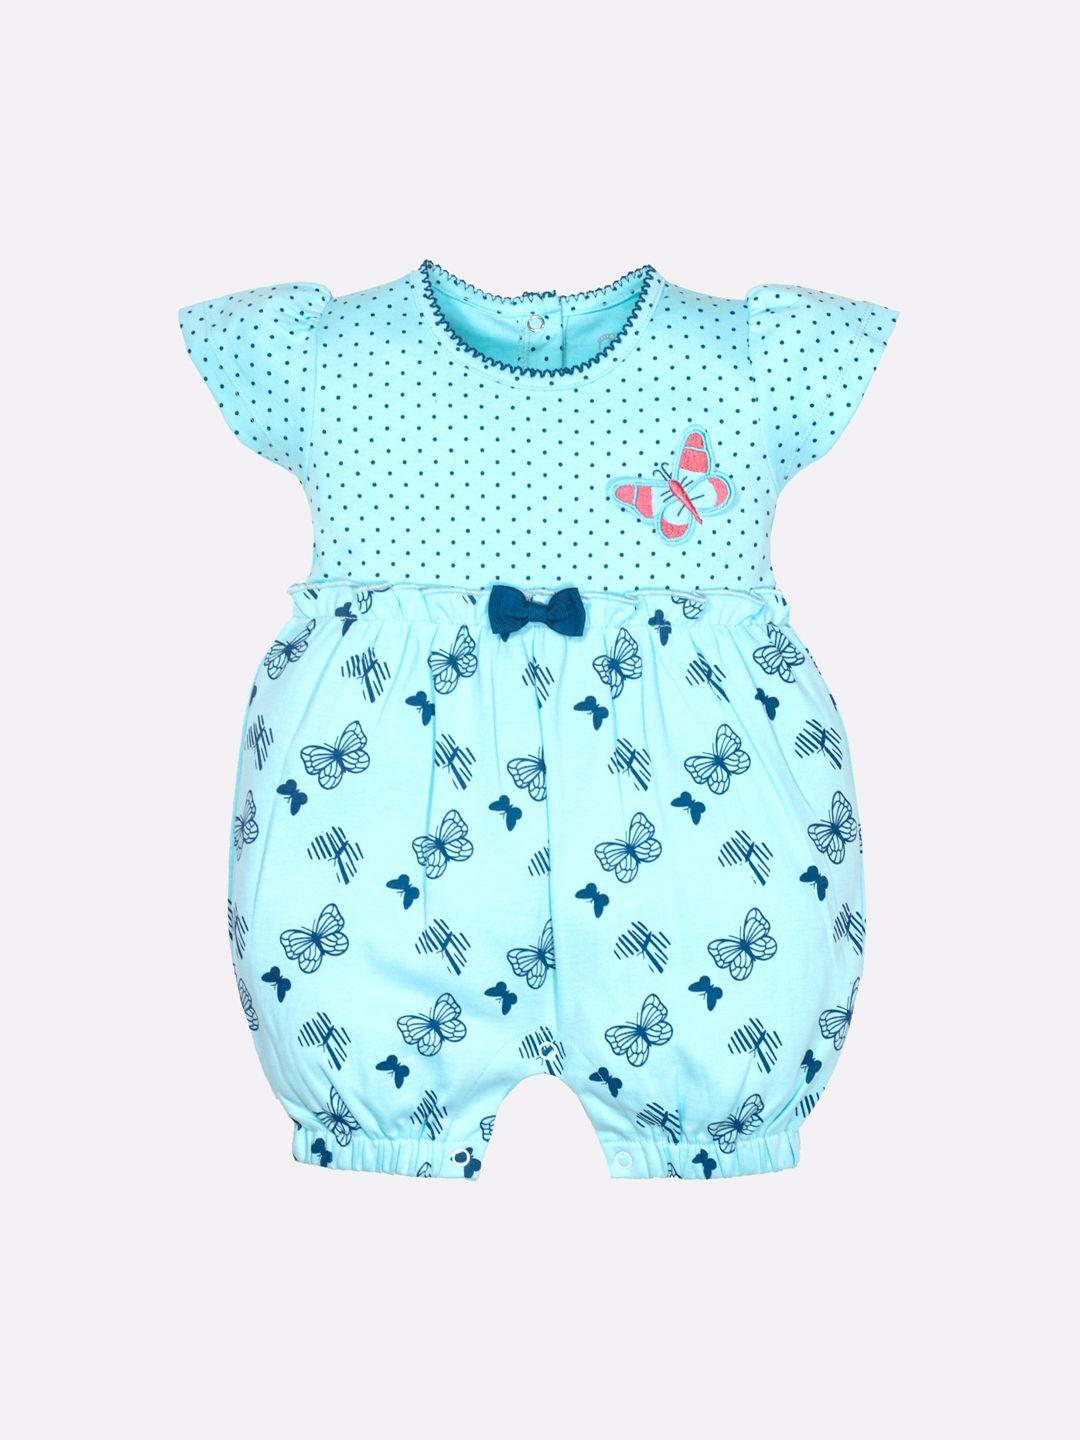 BABY GO Infants Girls Blue & Pink Printed Pure Cotton Romper